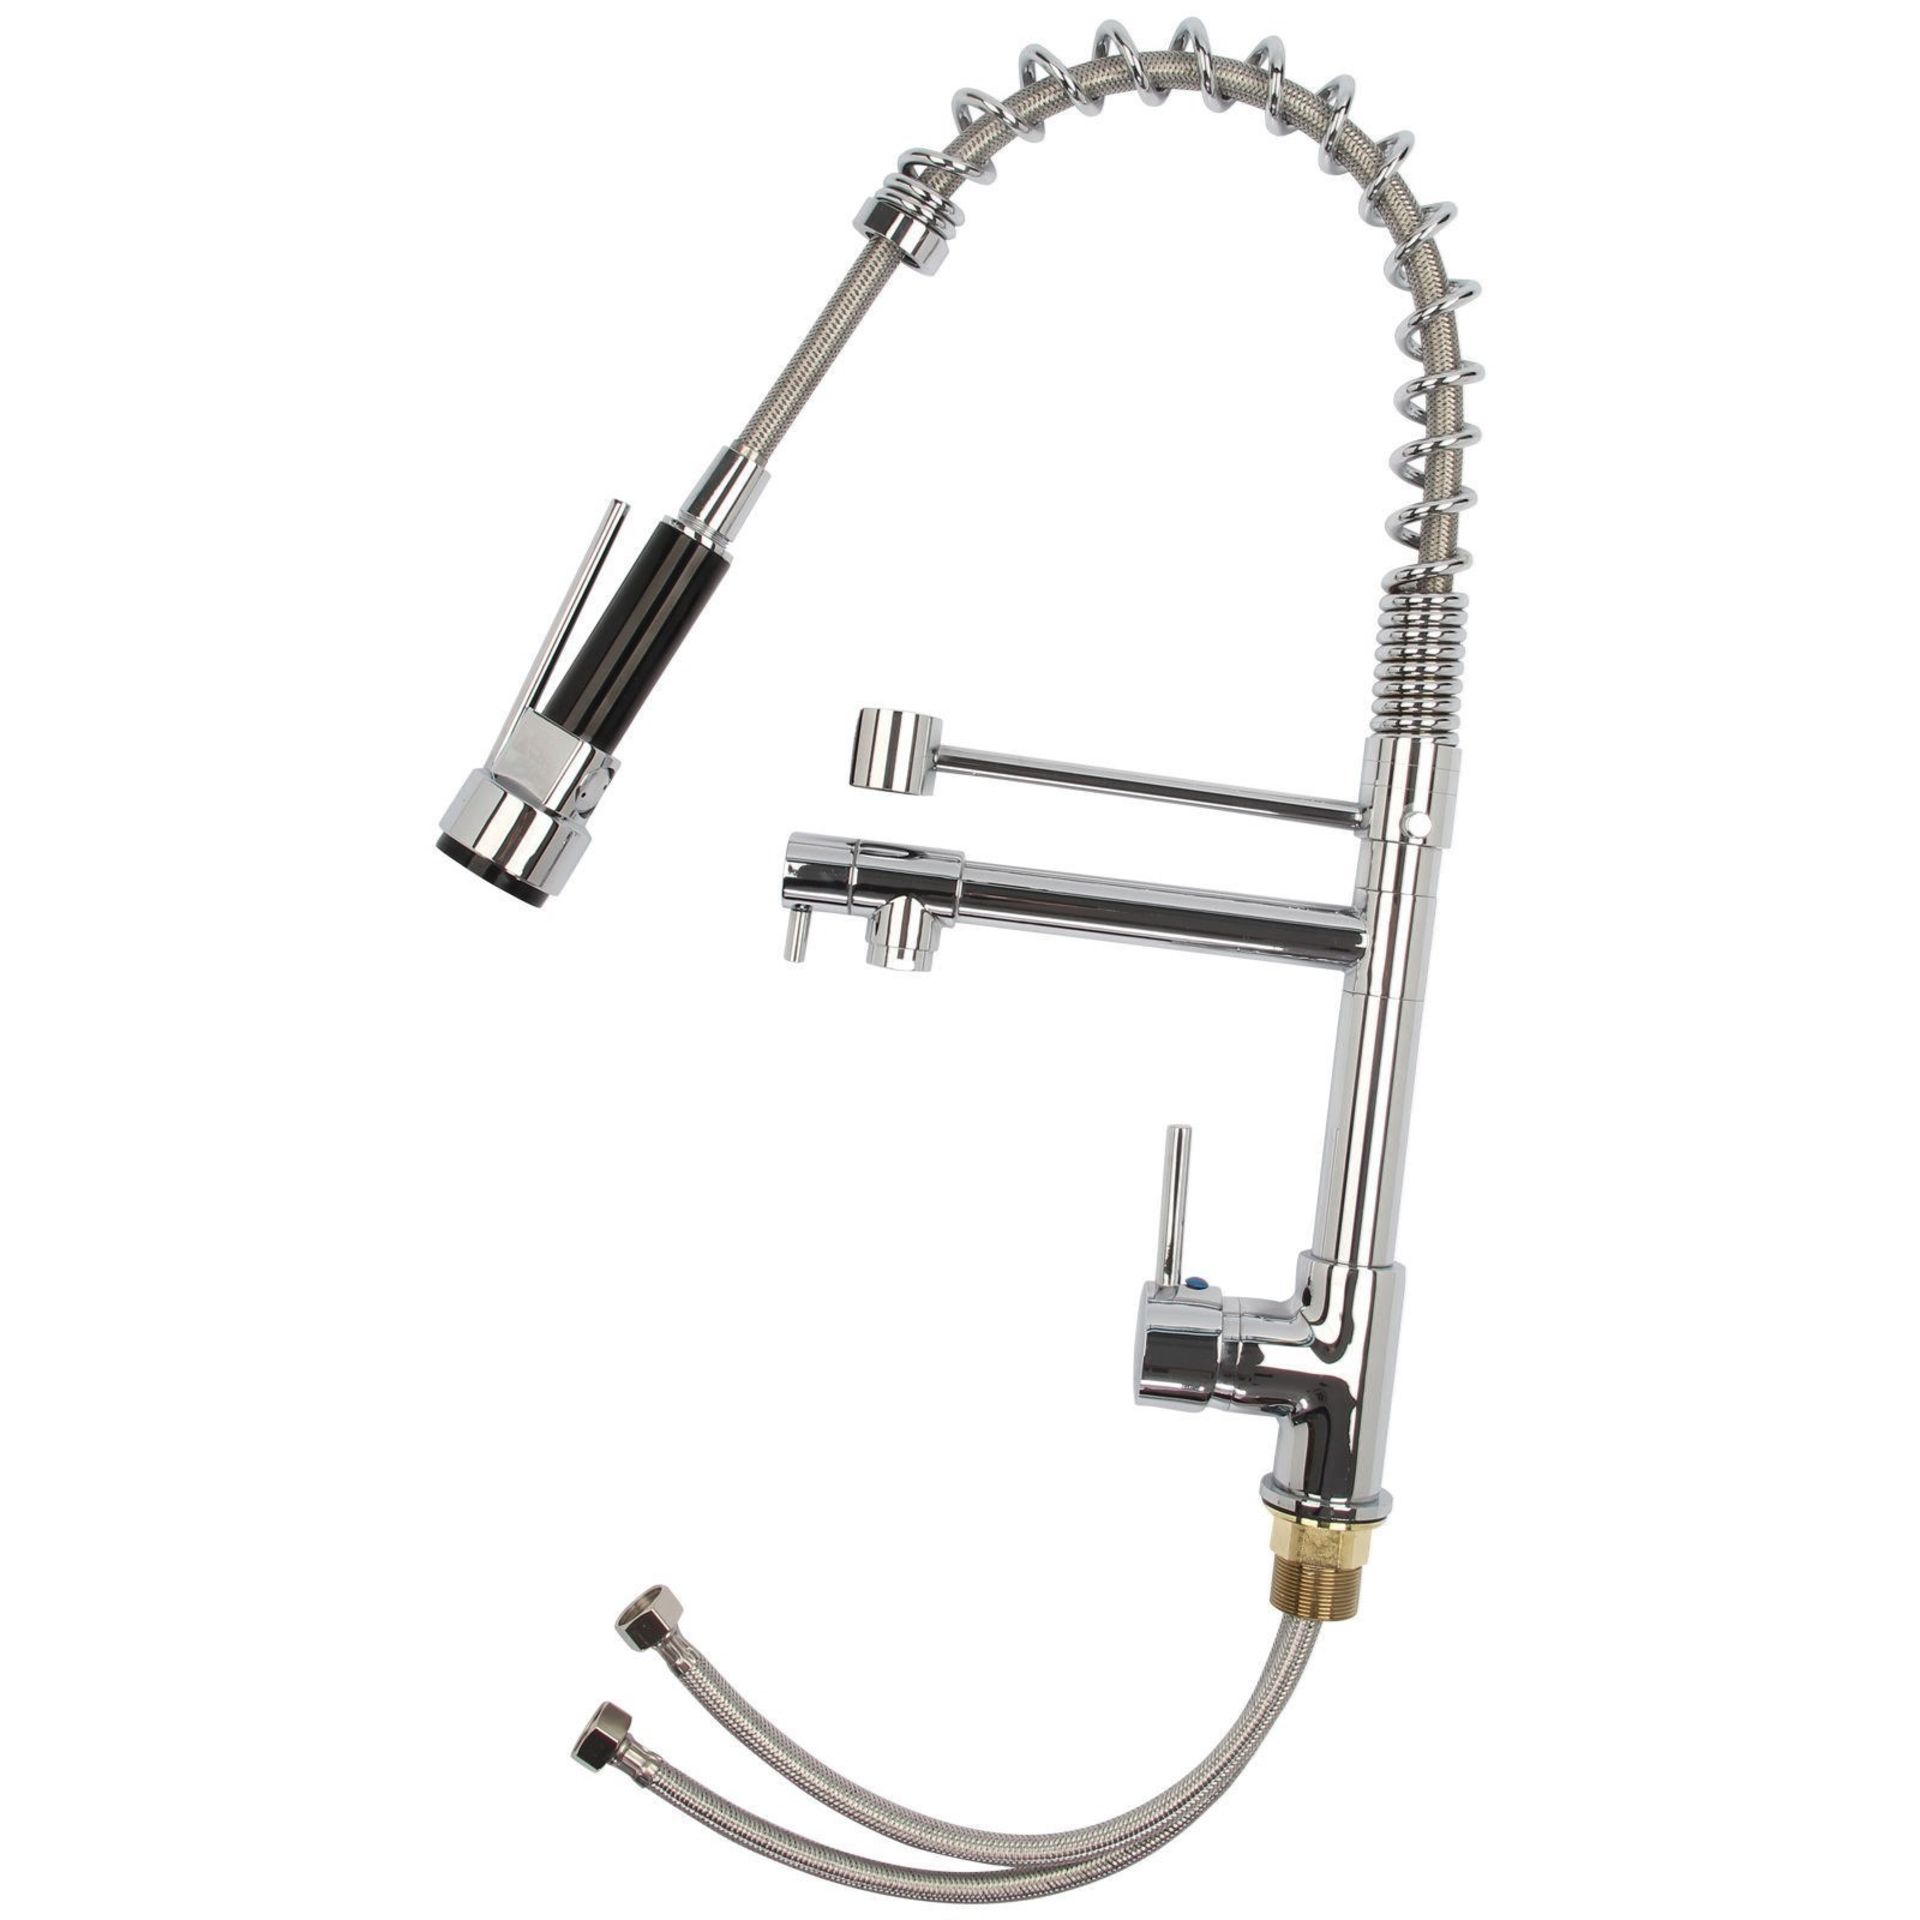 Bentley Modern Monobloc Chrome Brass Pull Out Spray Mixer Tap. RRP £349.99.This tap is from ... - Image 3 of 4